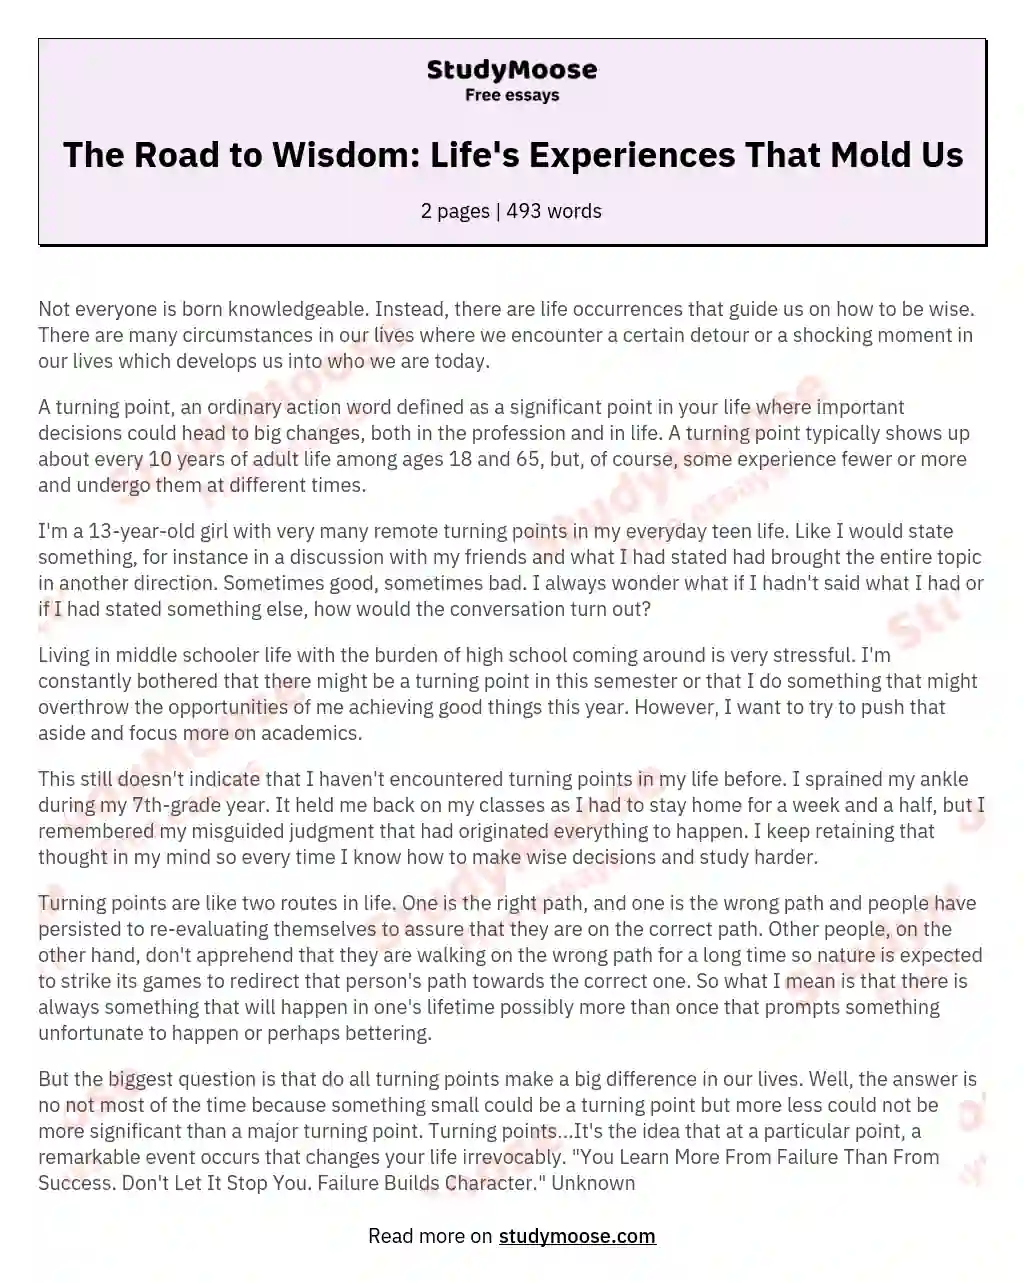 The Road to Wisdom: Life's Experiences That Mold Us essay